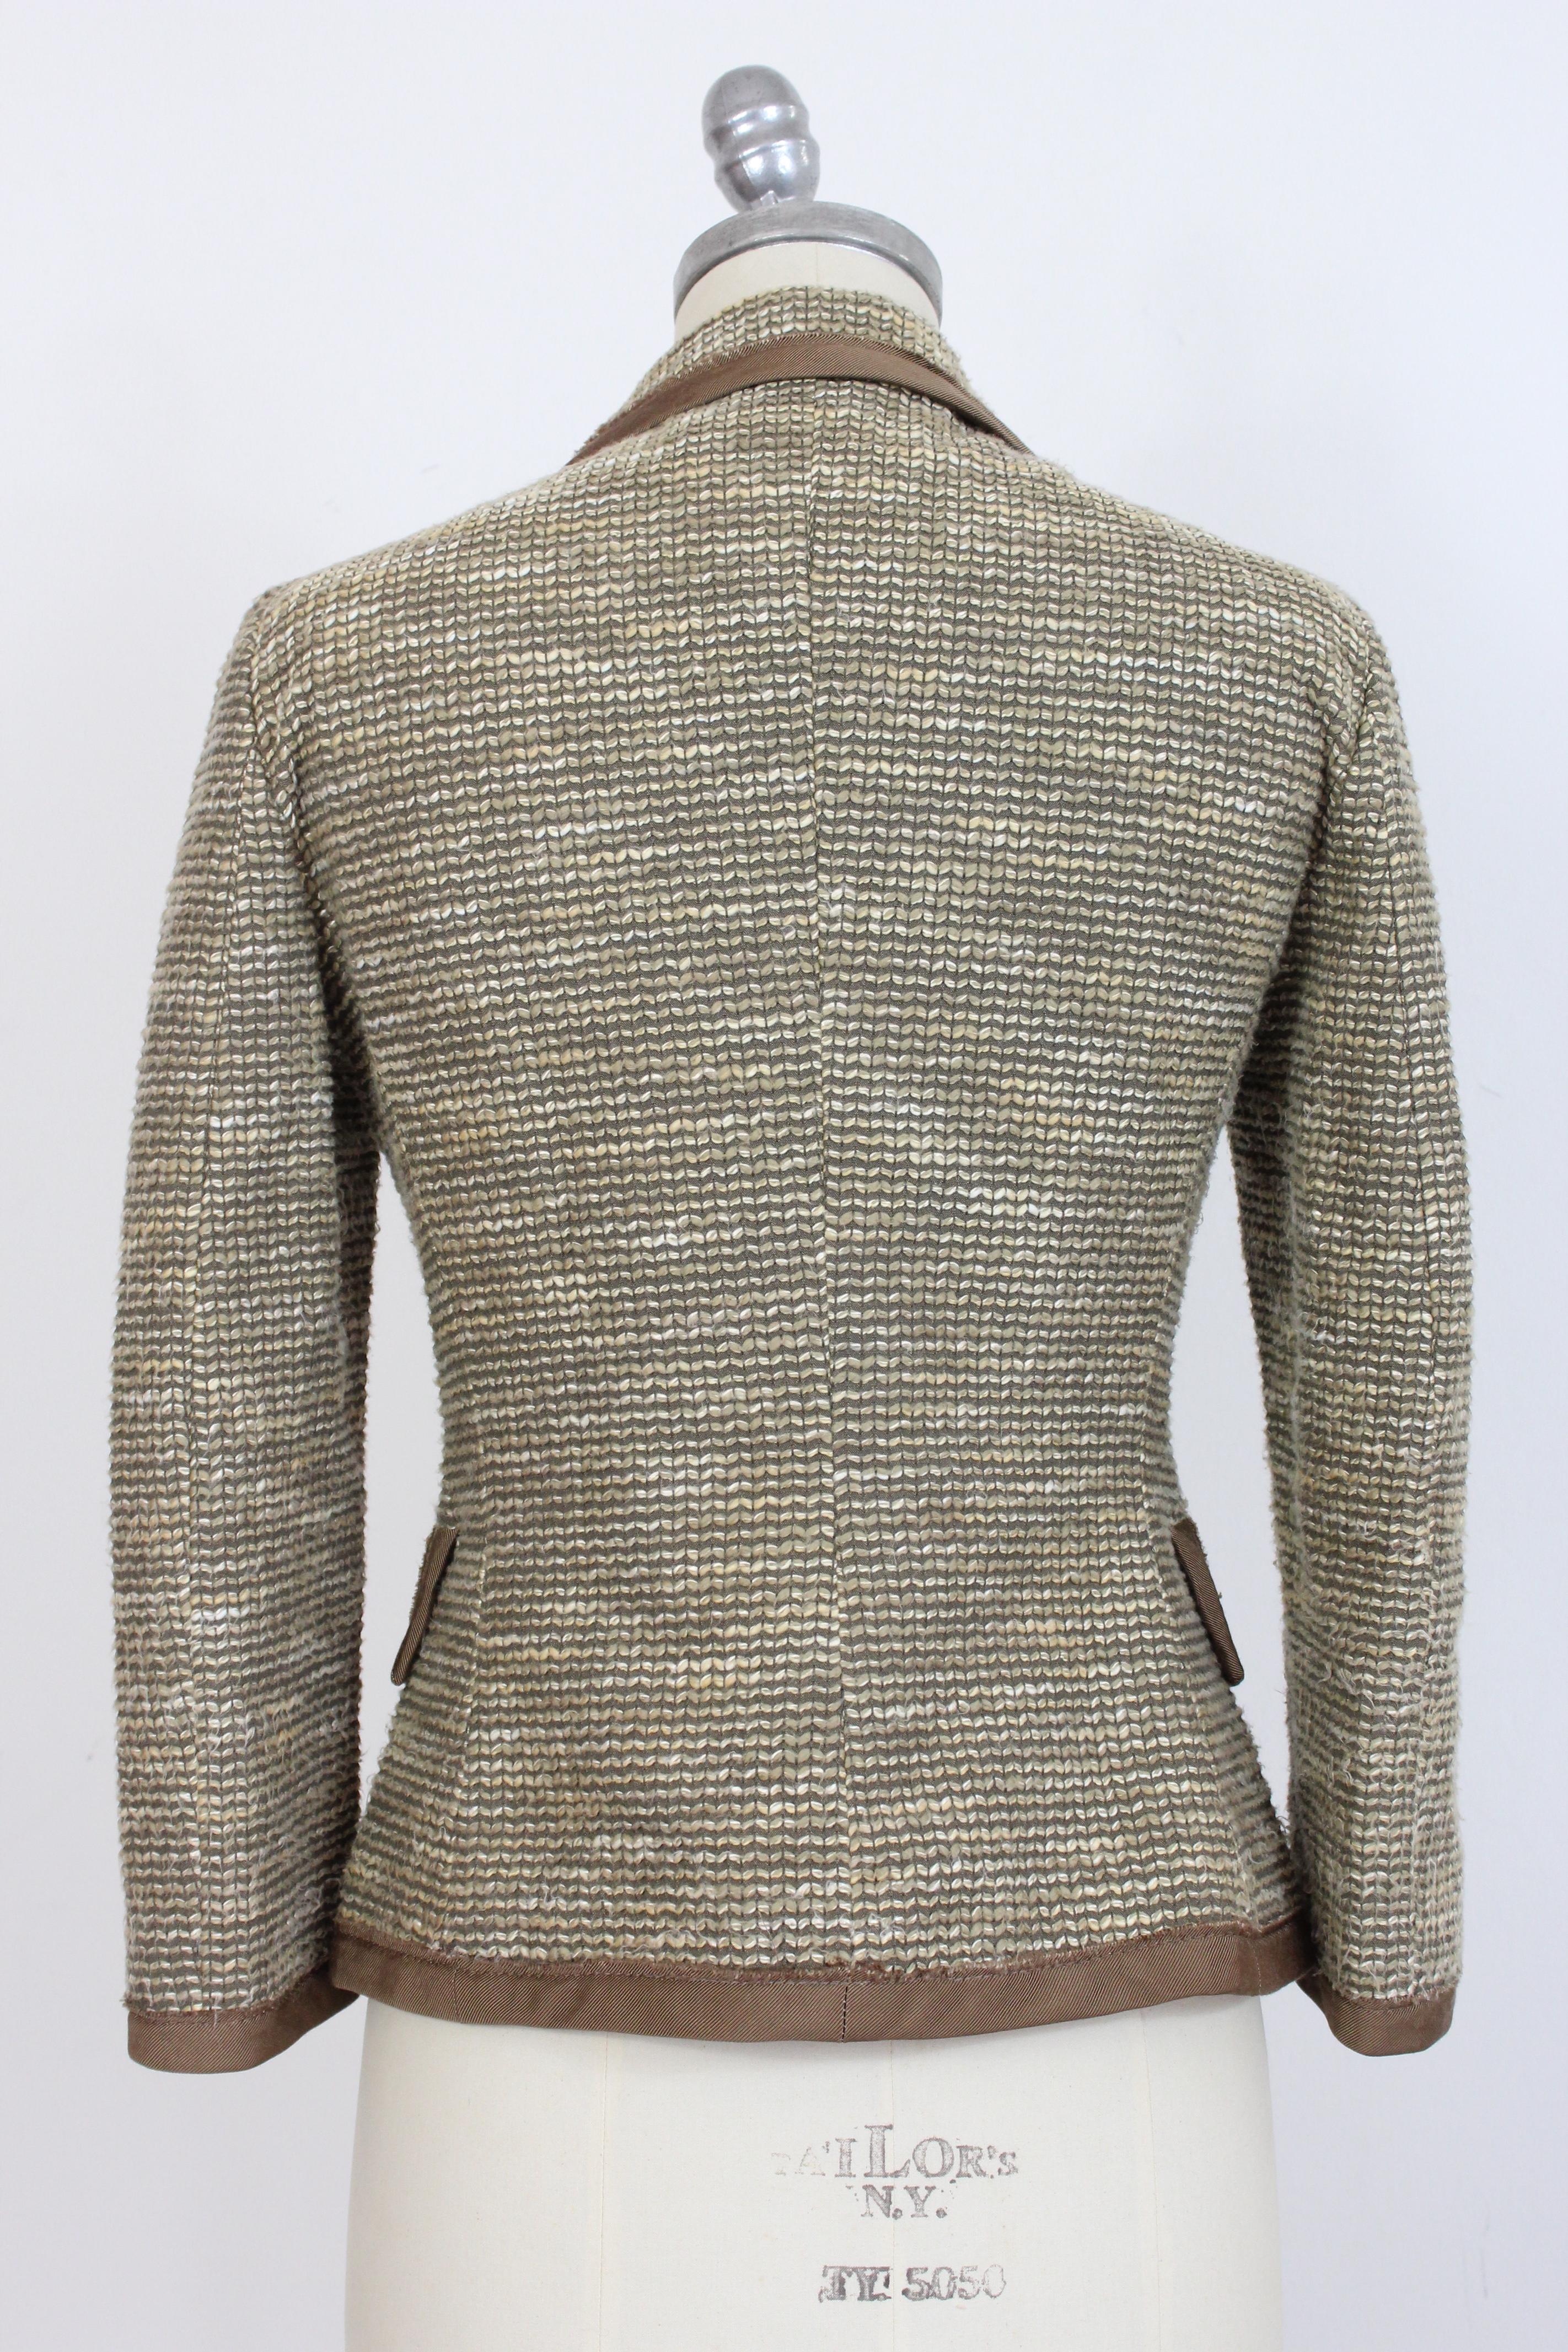 Moschino Cheap and Chic 90s vintage women's jacket. Fitted blazer, elegant, beige and brown, bows on the neck. 3/4 flared sleeve. External fabric 88% cotton 12% rayon, internally lined 100% cotton. Made in Italy.

Condition: Excellent

Item used few